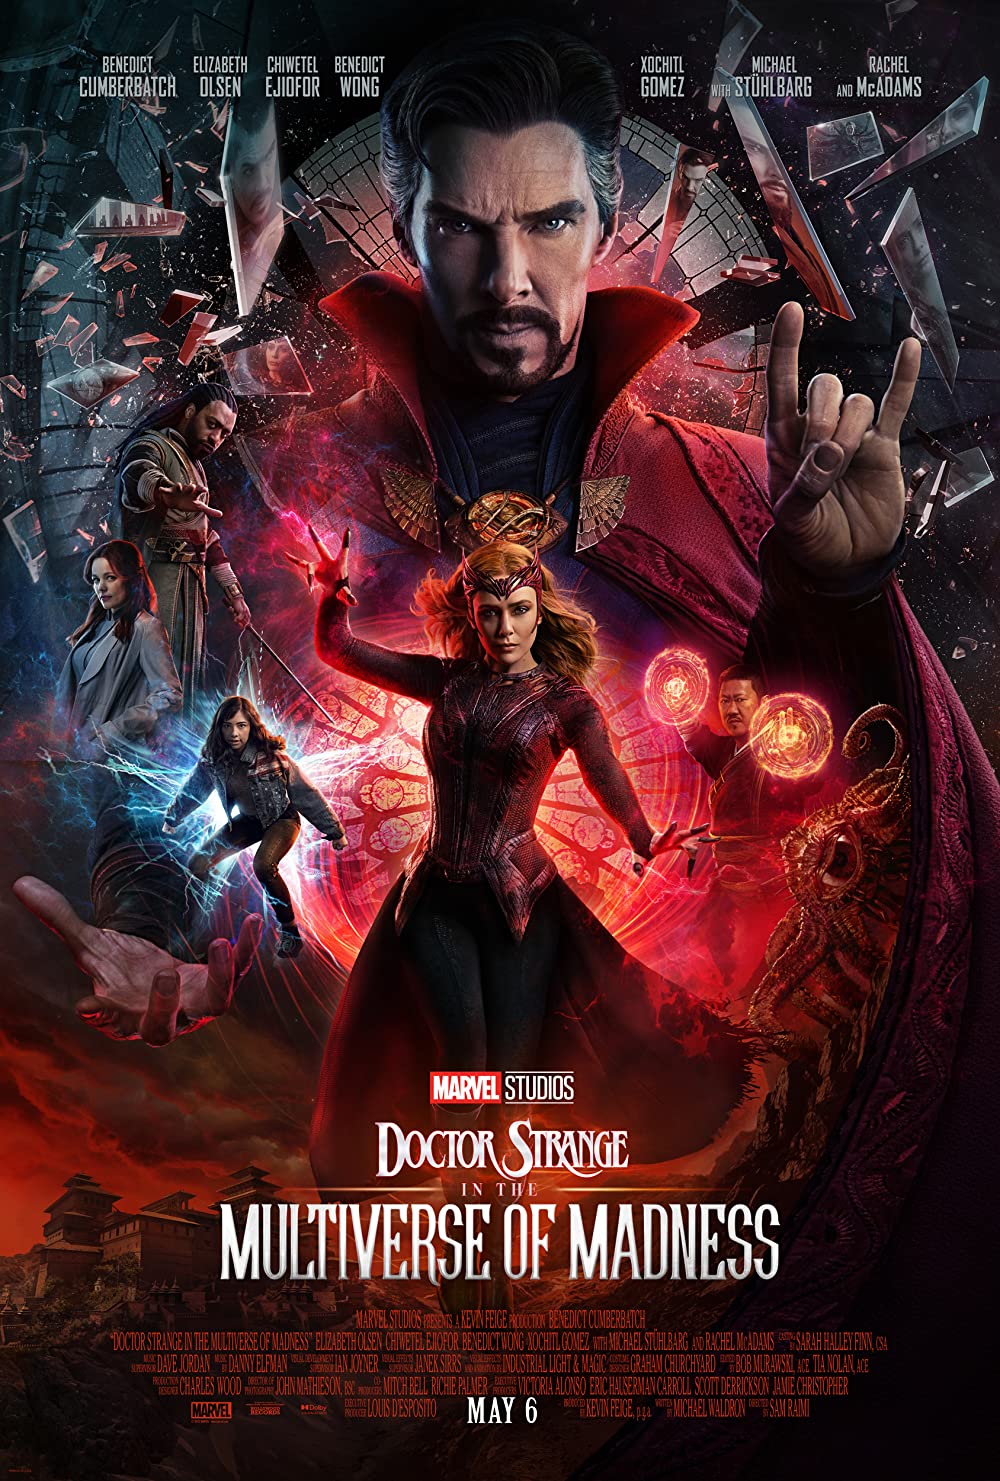 Family Night in the Park – Movie Series: Dr. Strange & the Multiverse of Madness